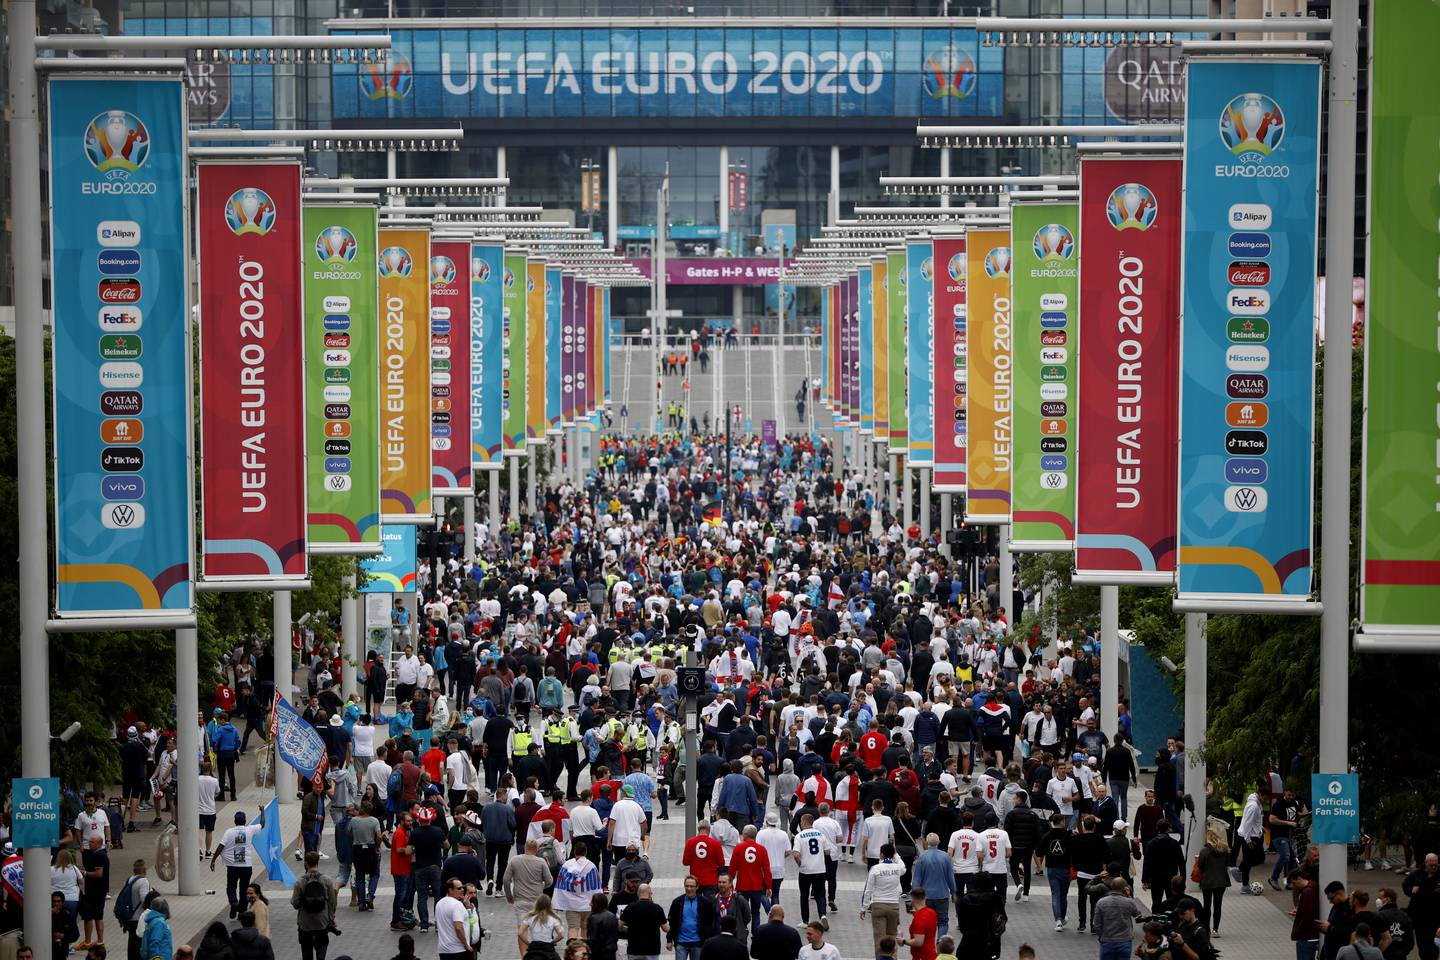 German politicians voiced concern over the crowds at Euro 2020 football games, seen here at Wembley on Tuesday. 